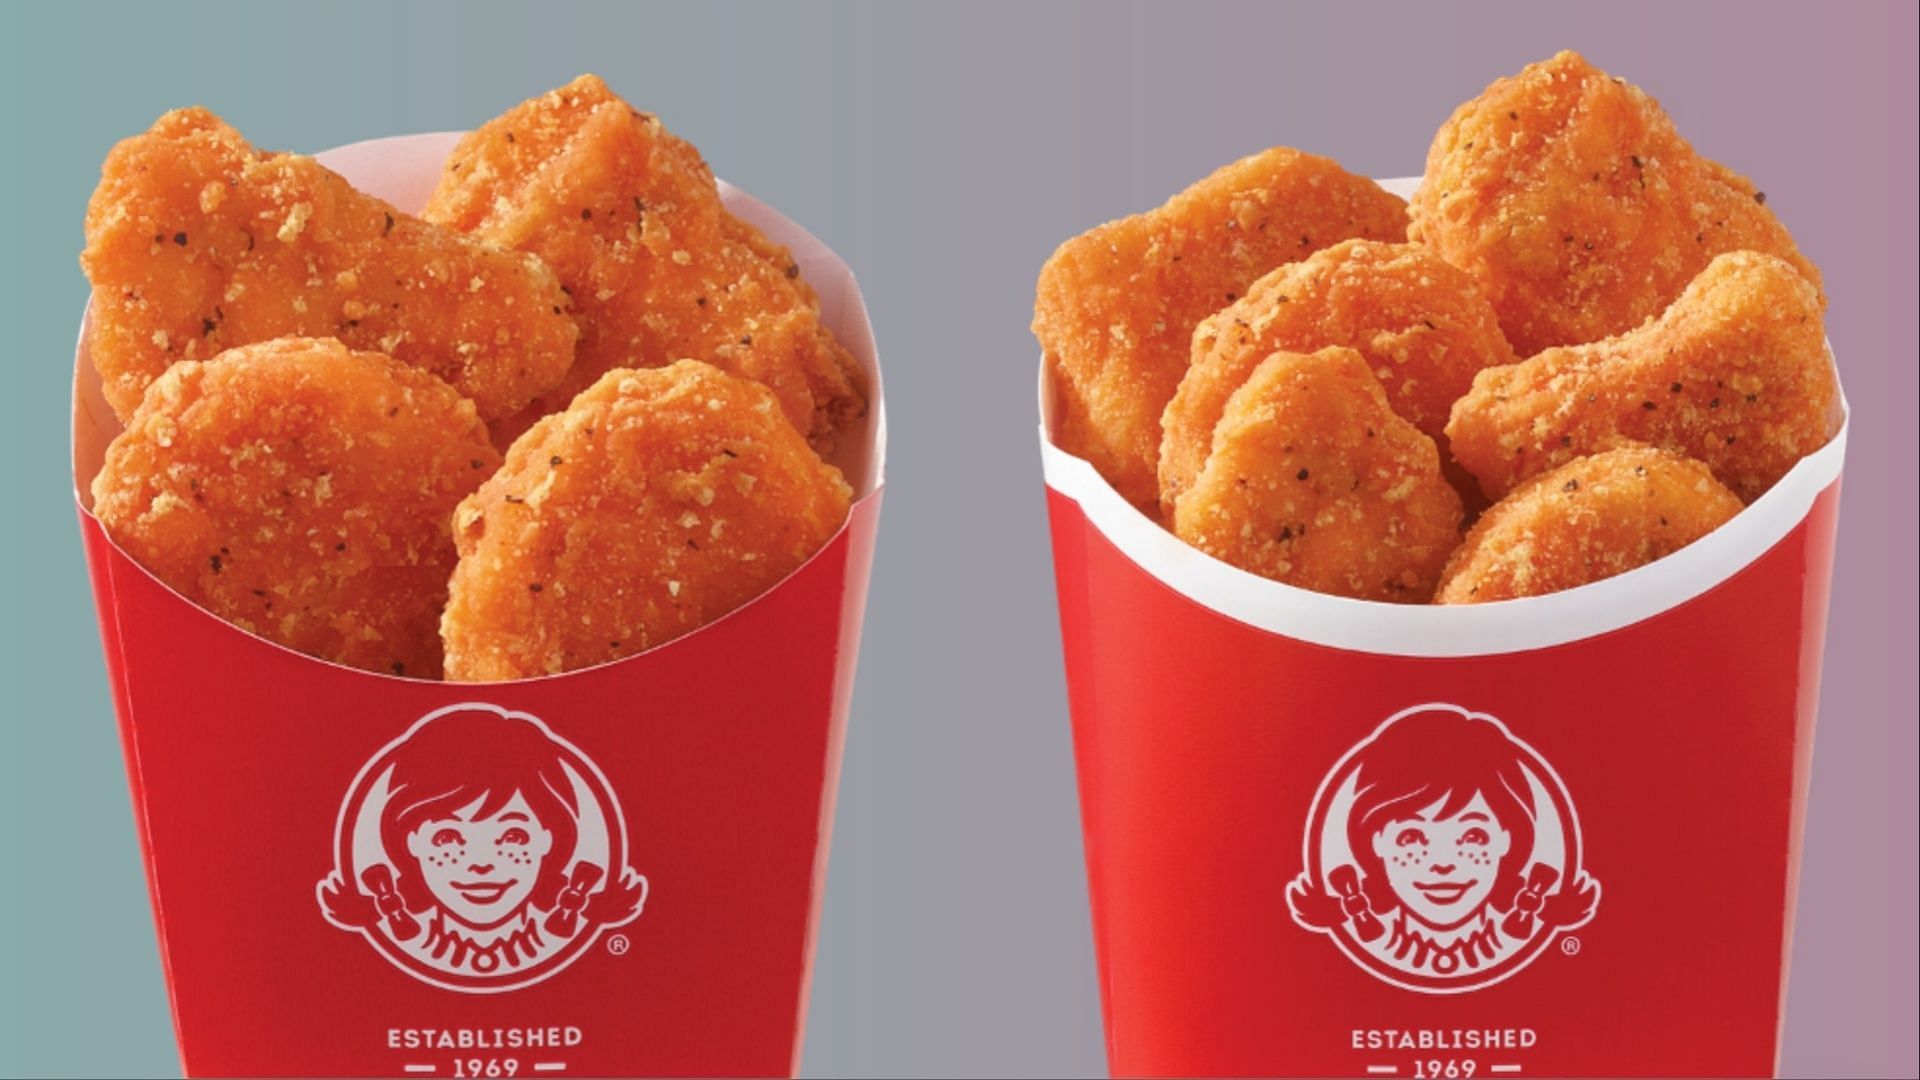 The free Chicken Nuggets can be claimed every Wednesday starting November 8 (Image via Wendy&rsquo;s)